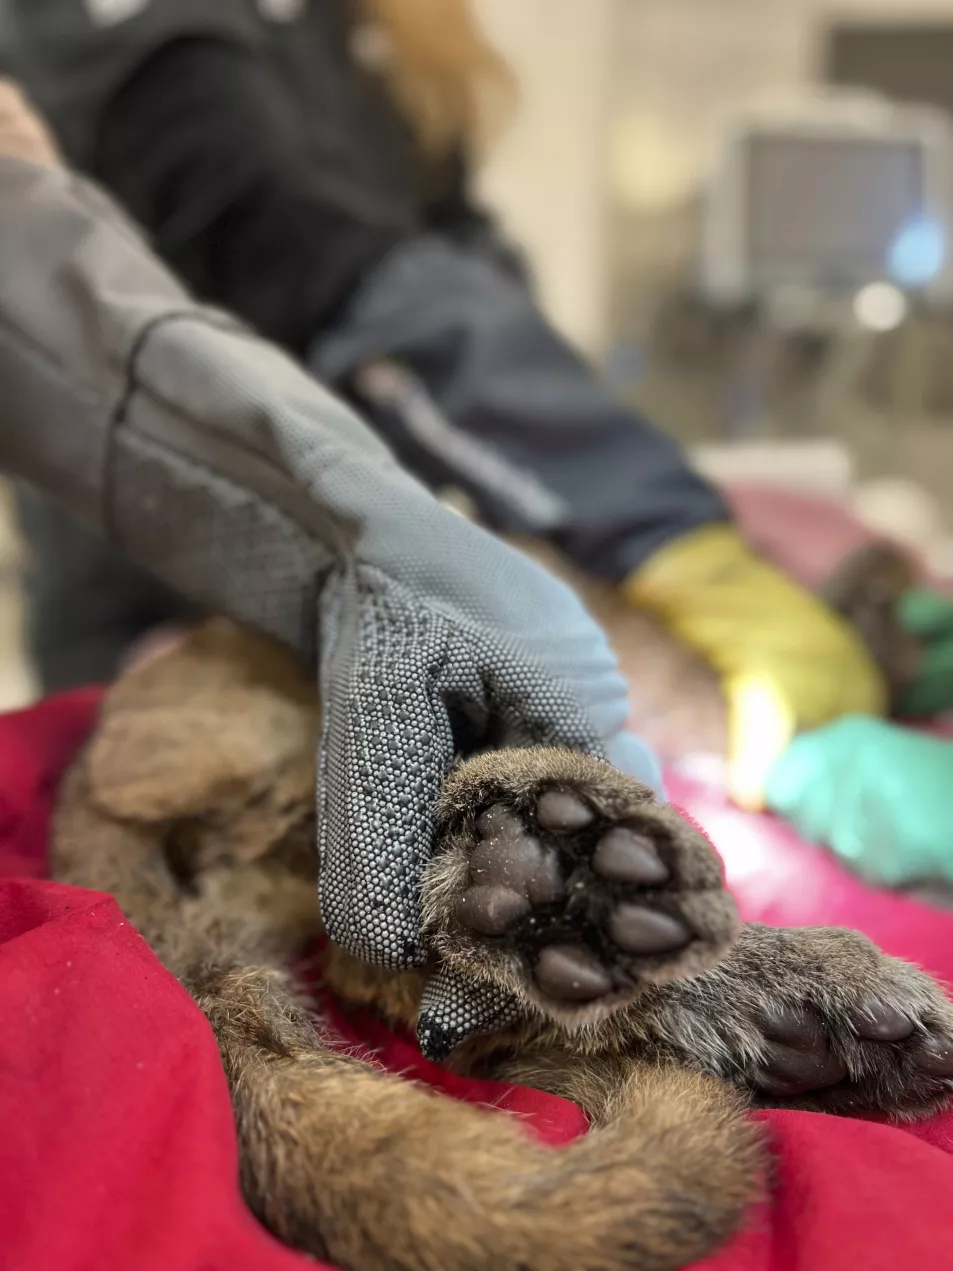 Wildlife officials rescued the critically ill mountain lion cub in Northern California and veterinarians named her Holly for the holiday season as they treat her in intensive care